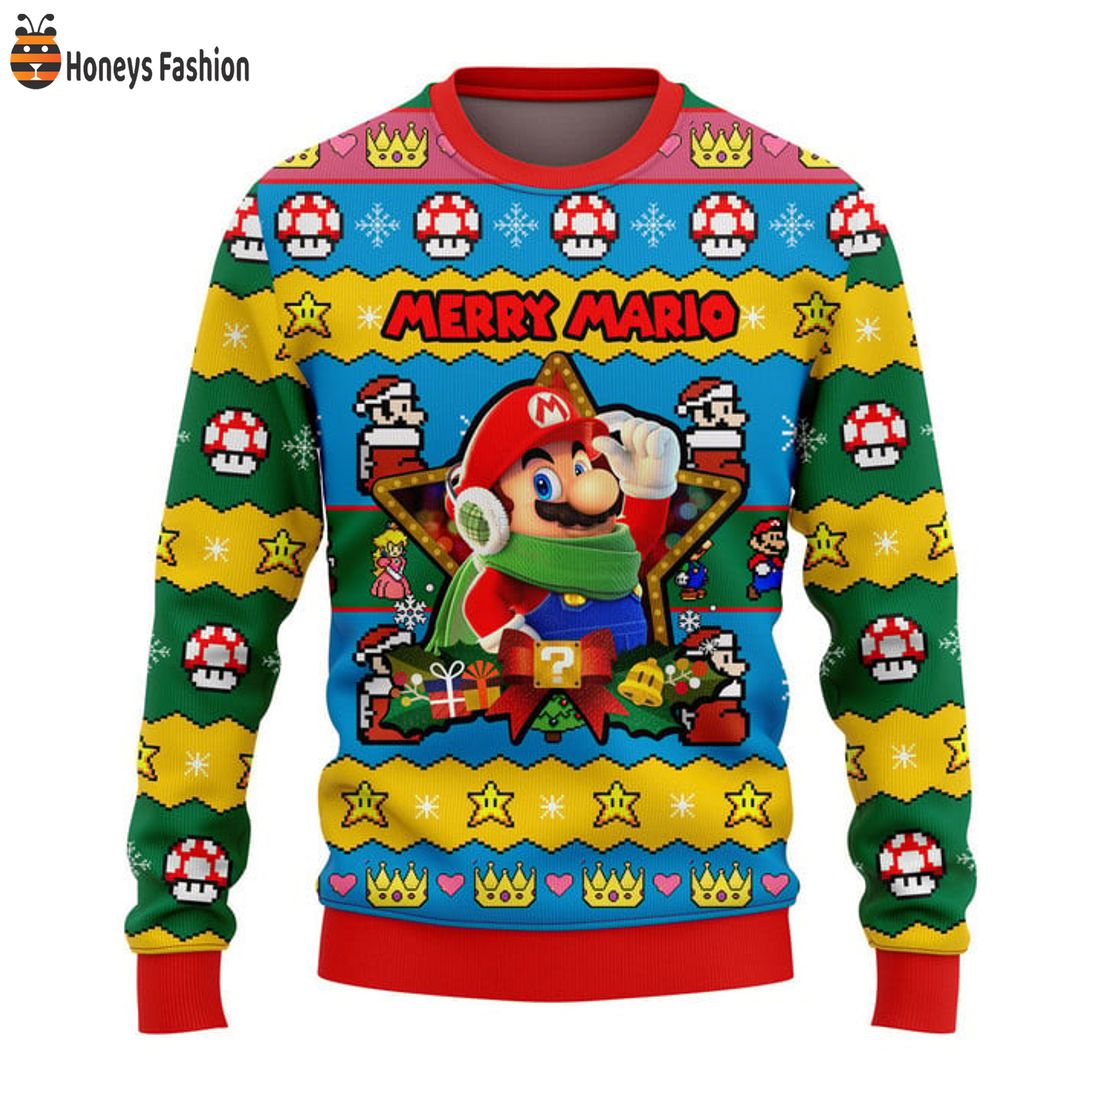 HOT Super Merry Mario Gift Ugly Christmas Sweater